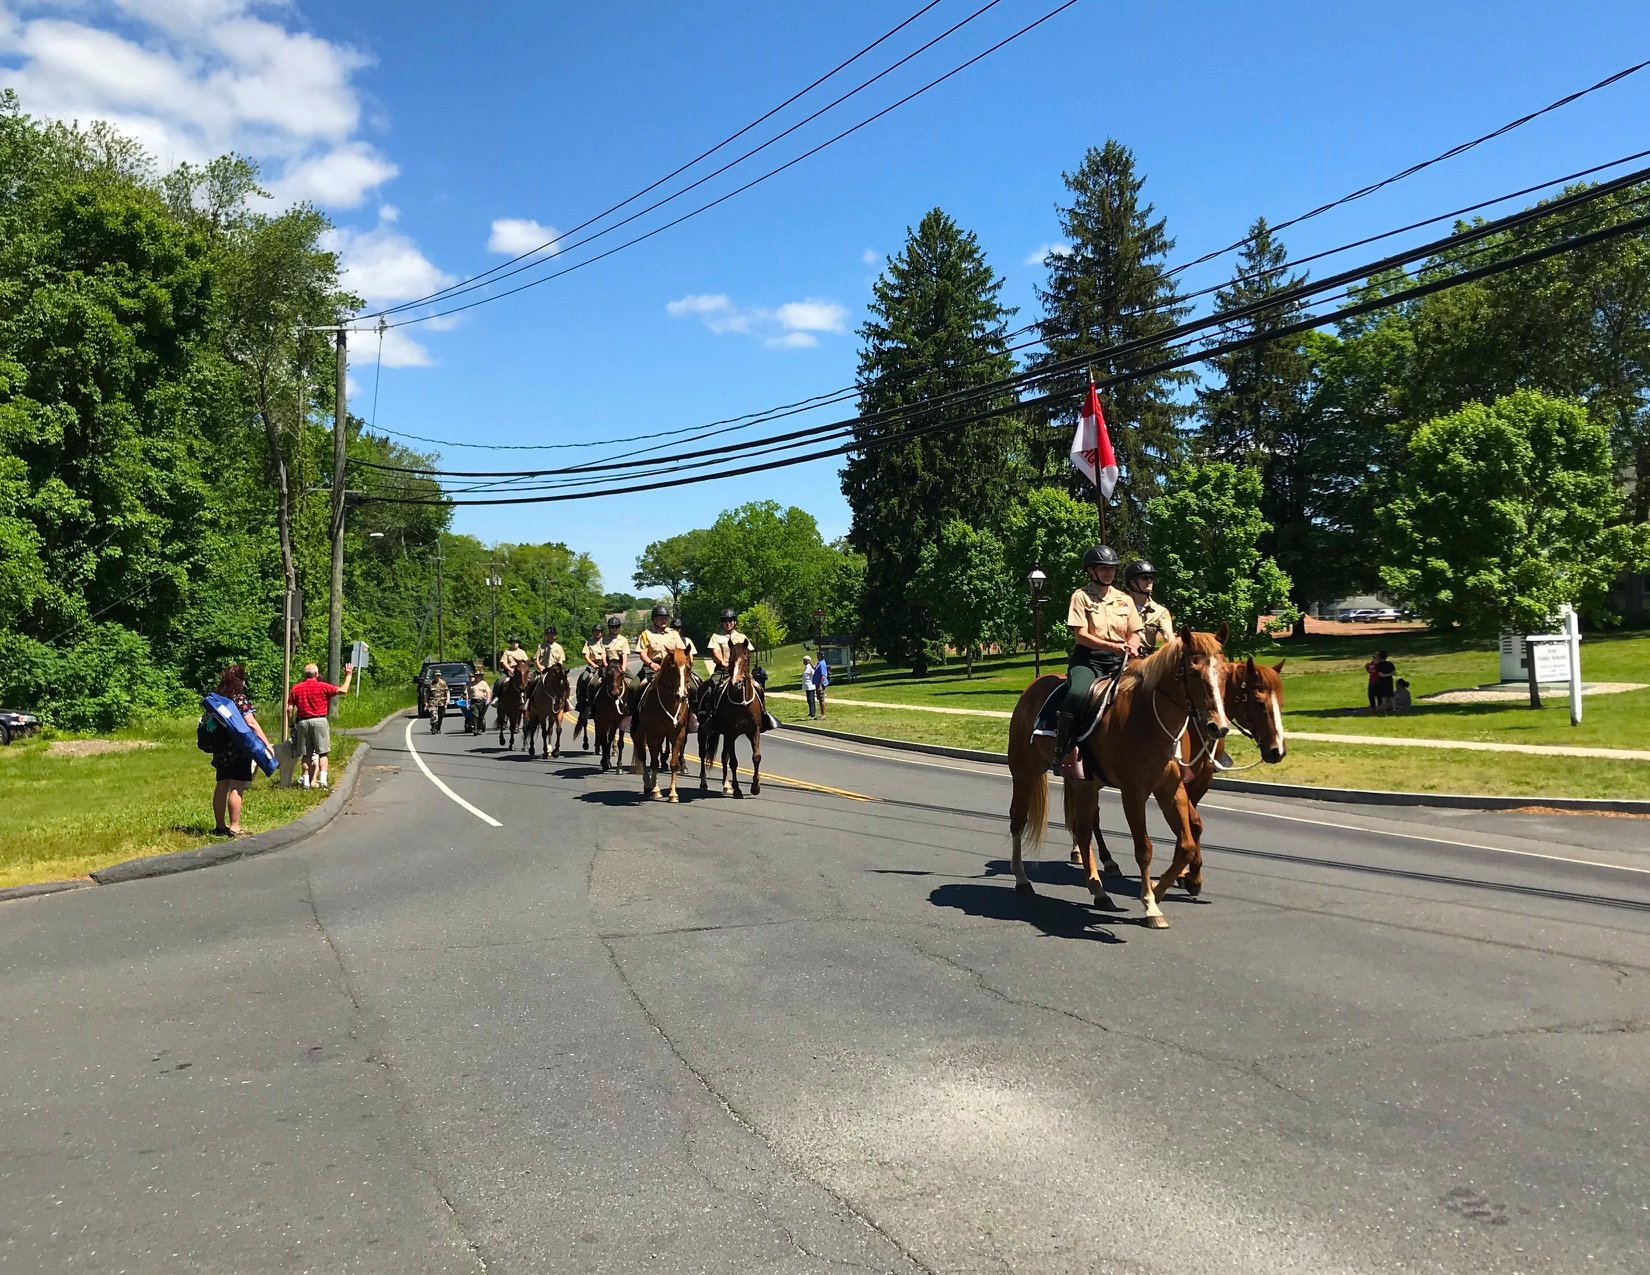 Image is of troopers riding horses in a parade.